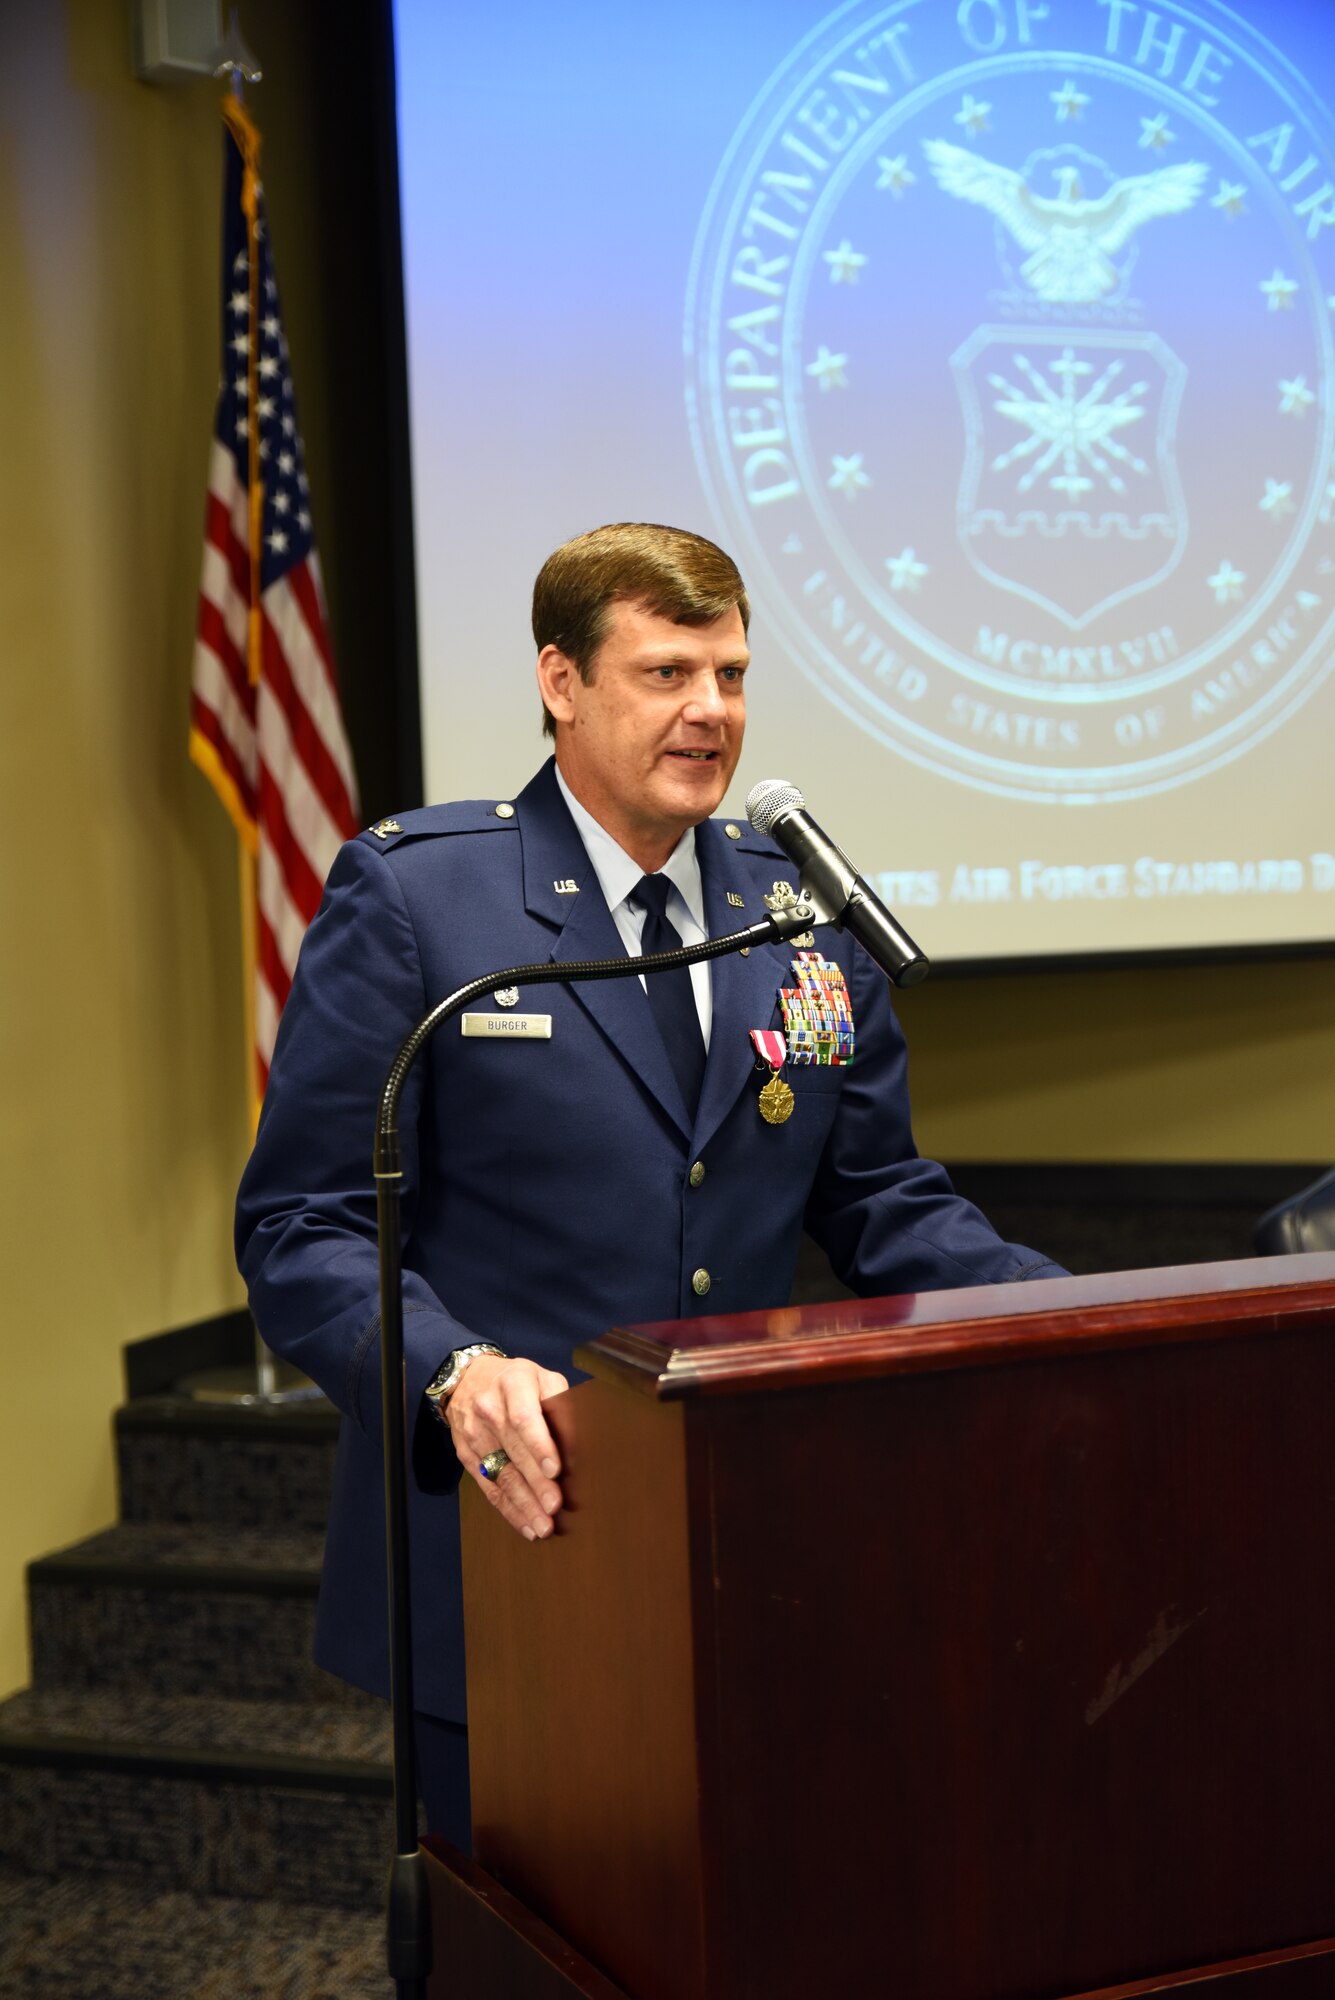 Col. Brian T. Burger, commander of the 188th Operations Group, speaks about his experiences at the 188th Wing May 15, 2016, during his formal retirement ceremony at Ebbing Air National Guard Base, Fort Smith, Ark. As a command pilot, Burger logged more than 6,100 hours of military flight during his 30 year career in numerous aircraft, including the A-10C Thunderbolt II Warthog, the wing's last aircraft. (U.S. Air National Guard photo by Senior Airman Cody Martin/Released)